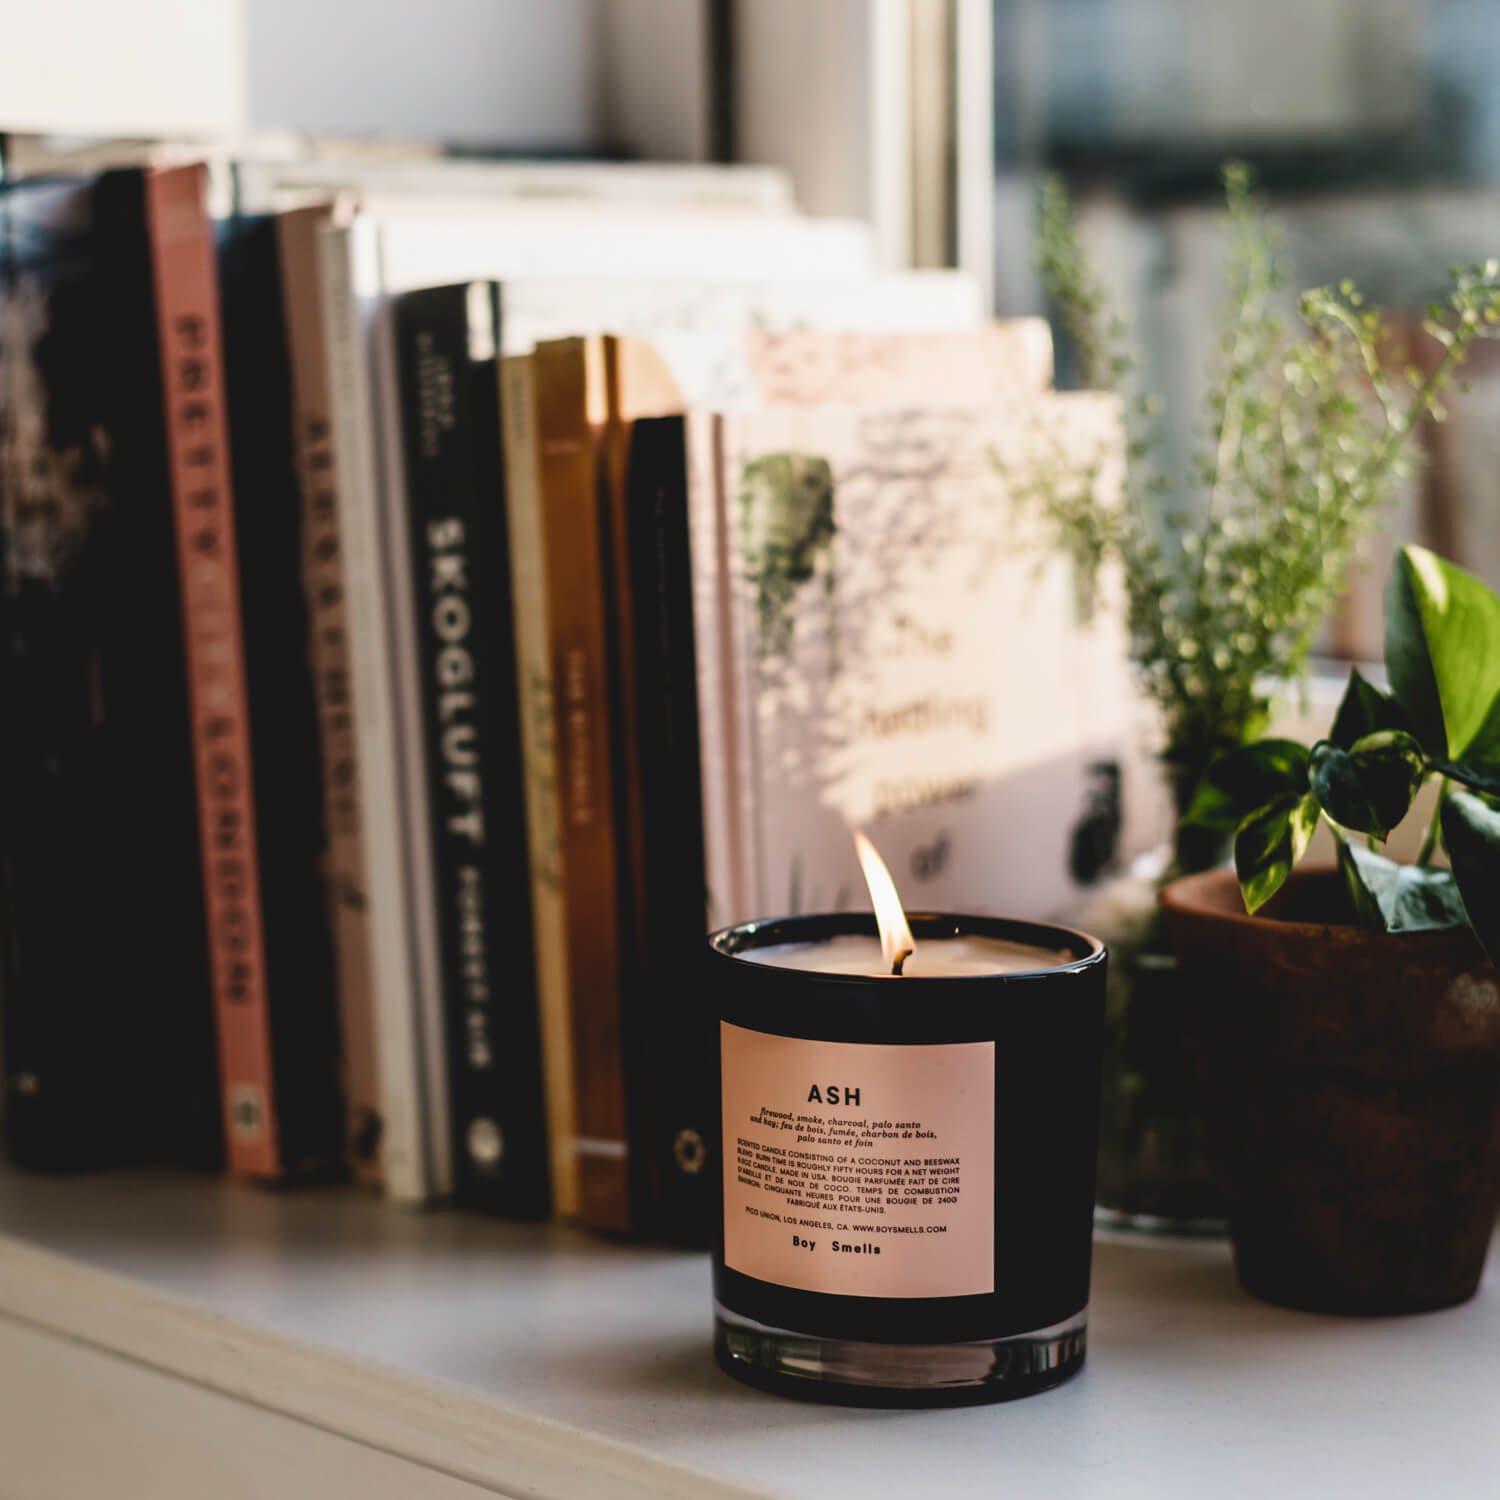 Ash Scented Candle by Boy Smells